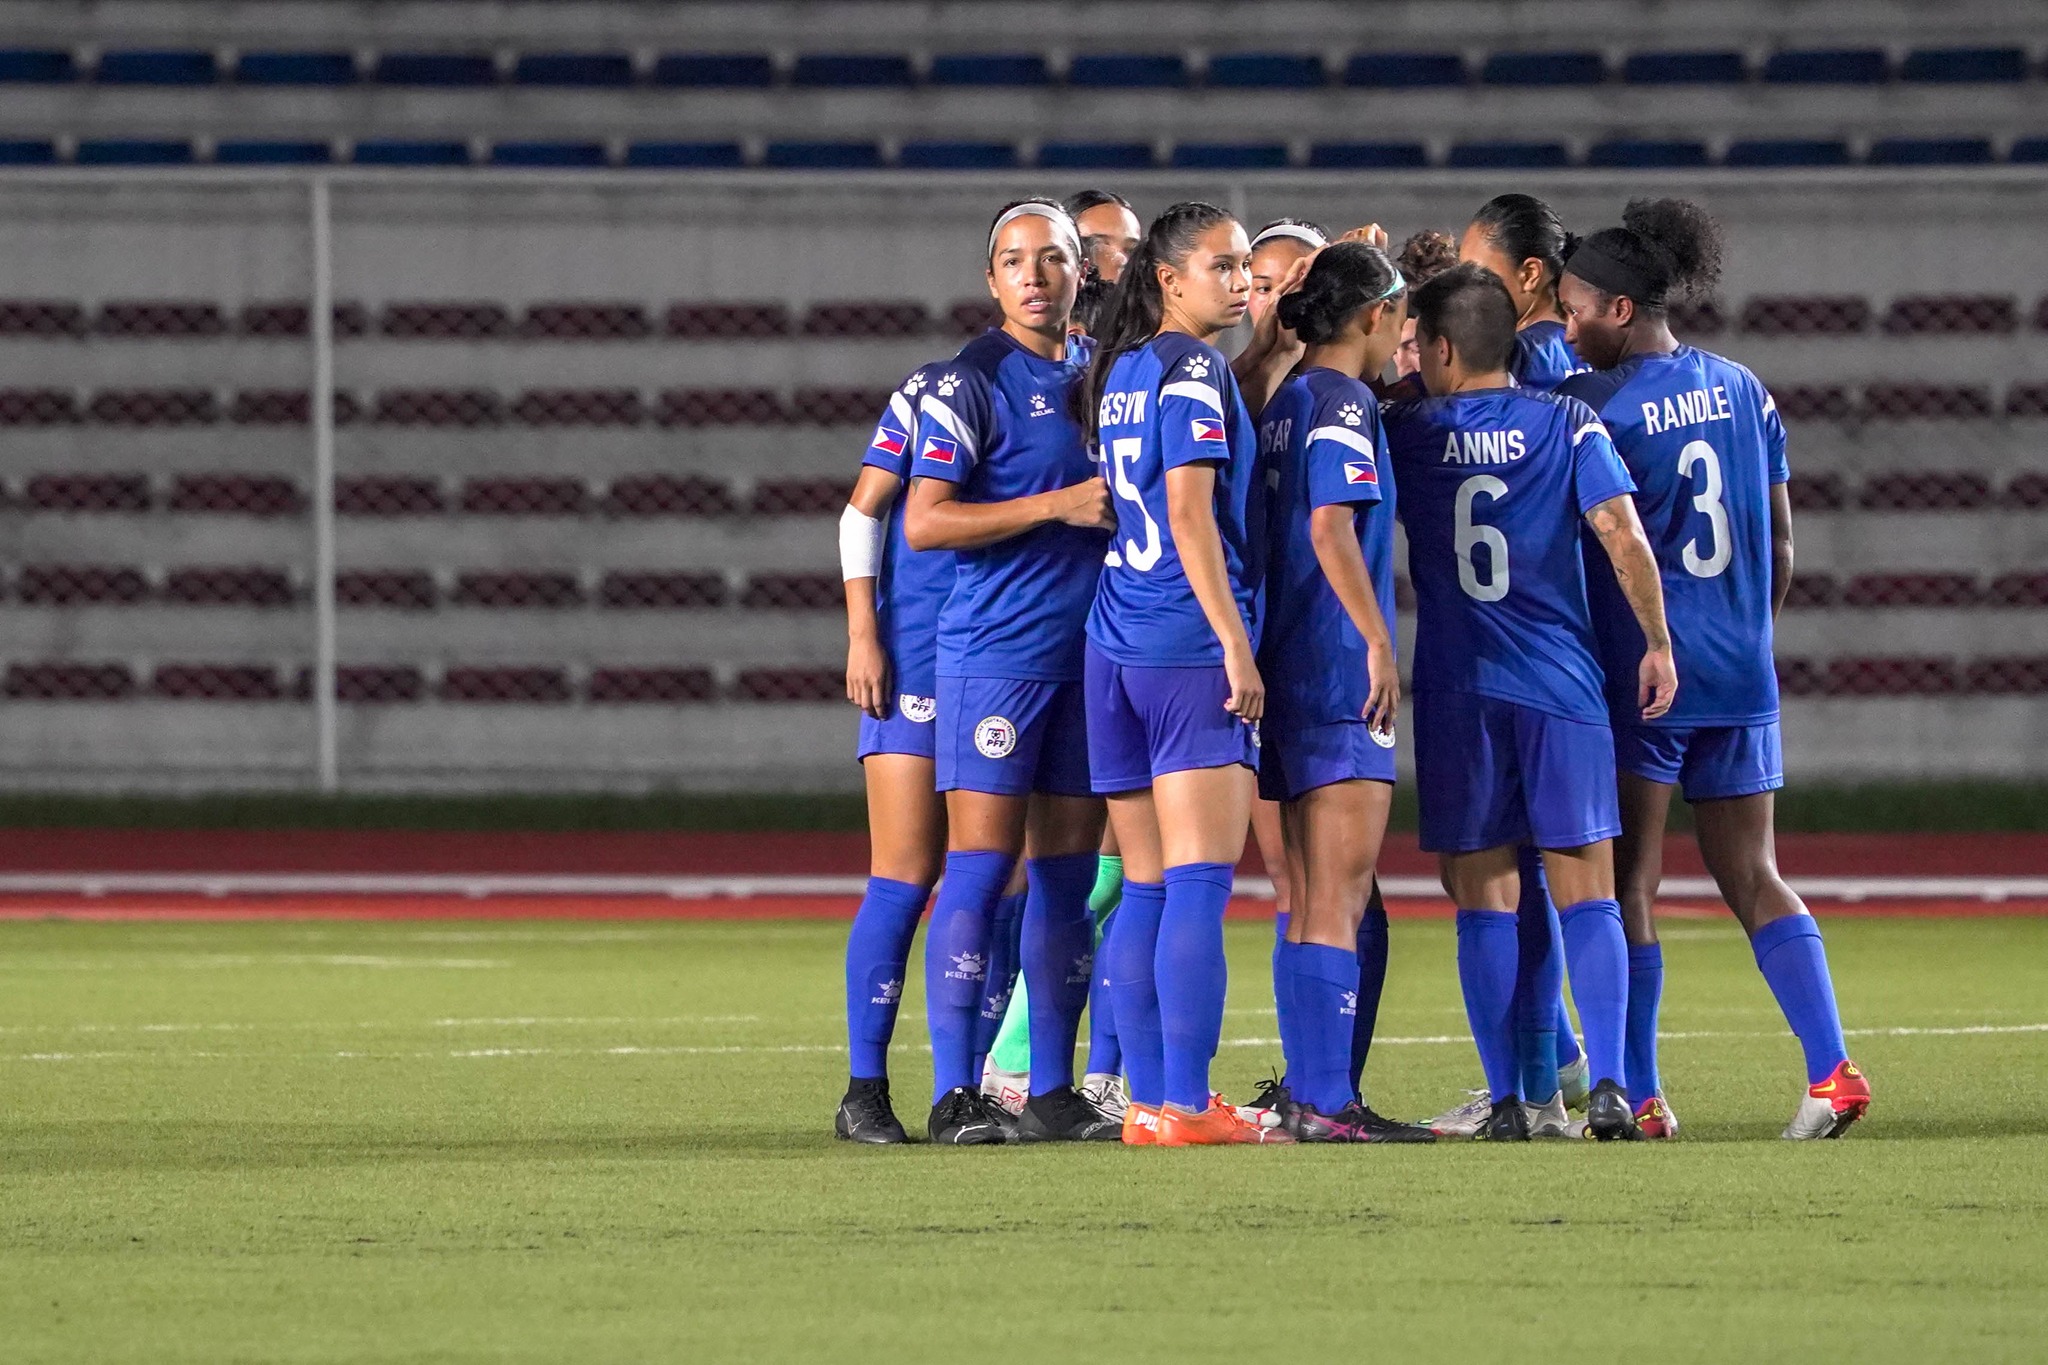 The Filipinas have been preparing as a team for their 2023 World Cup berth